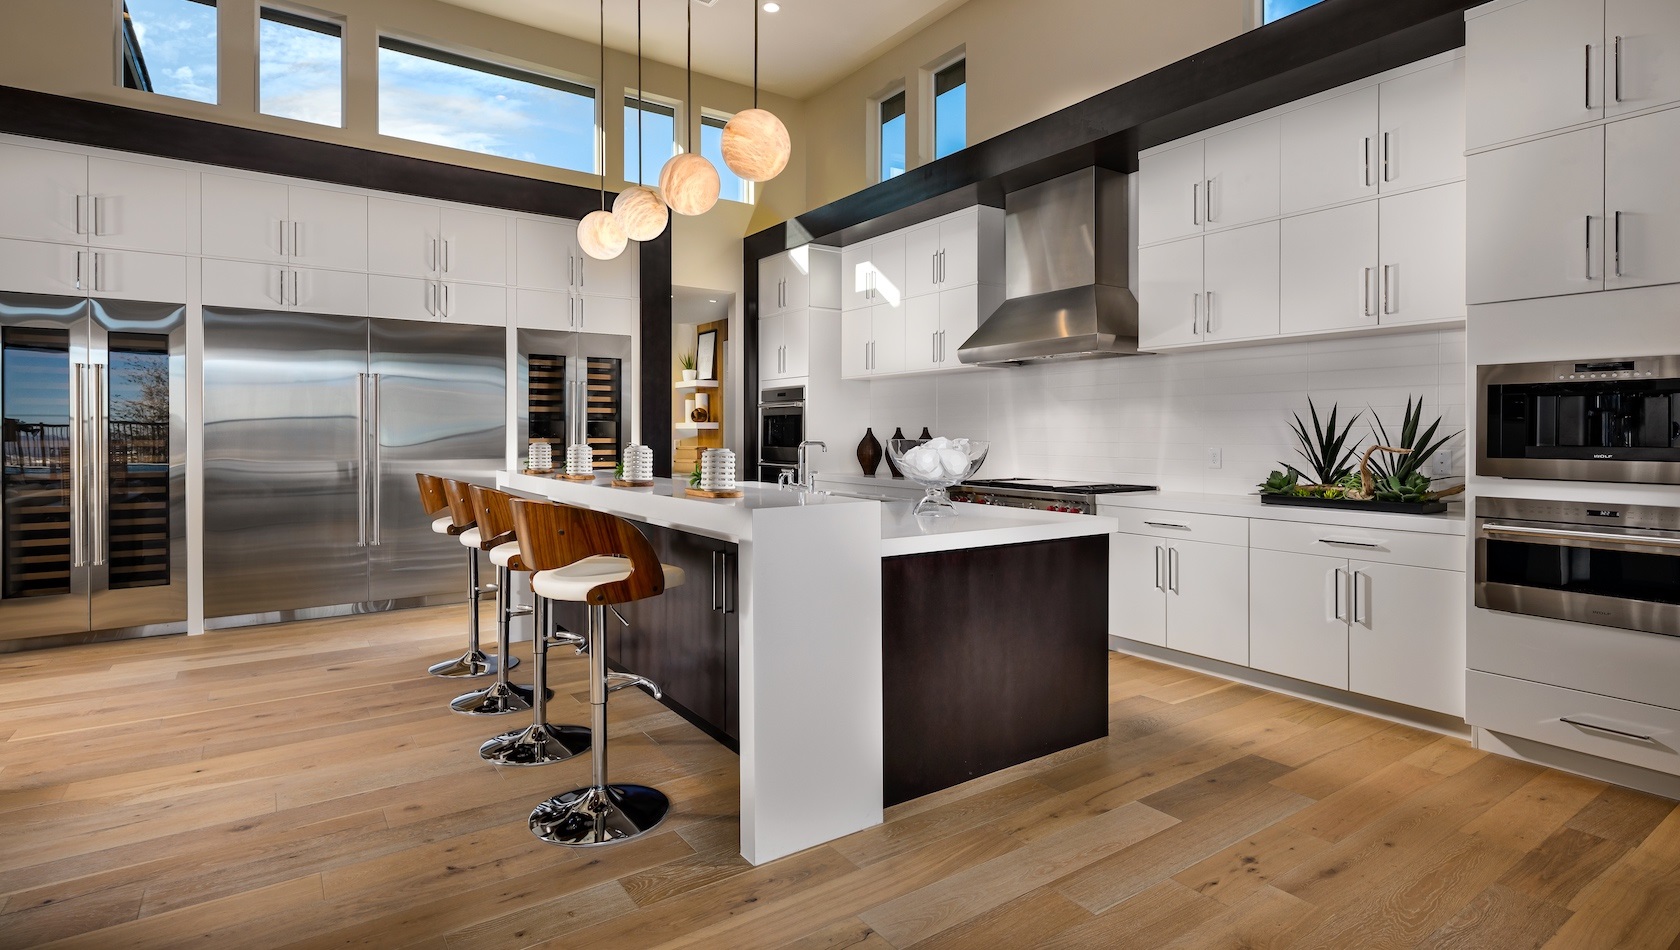 3 Luxurious Accents for a New (or Remodeled) Kitchen - acelblog.com